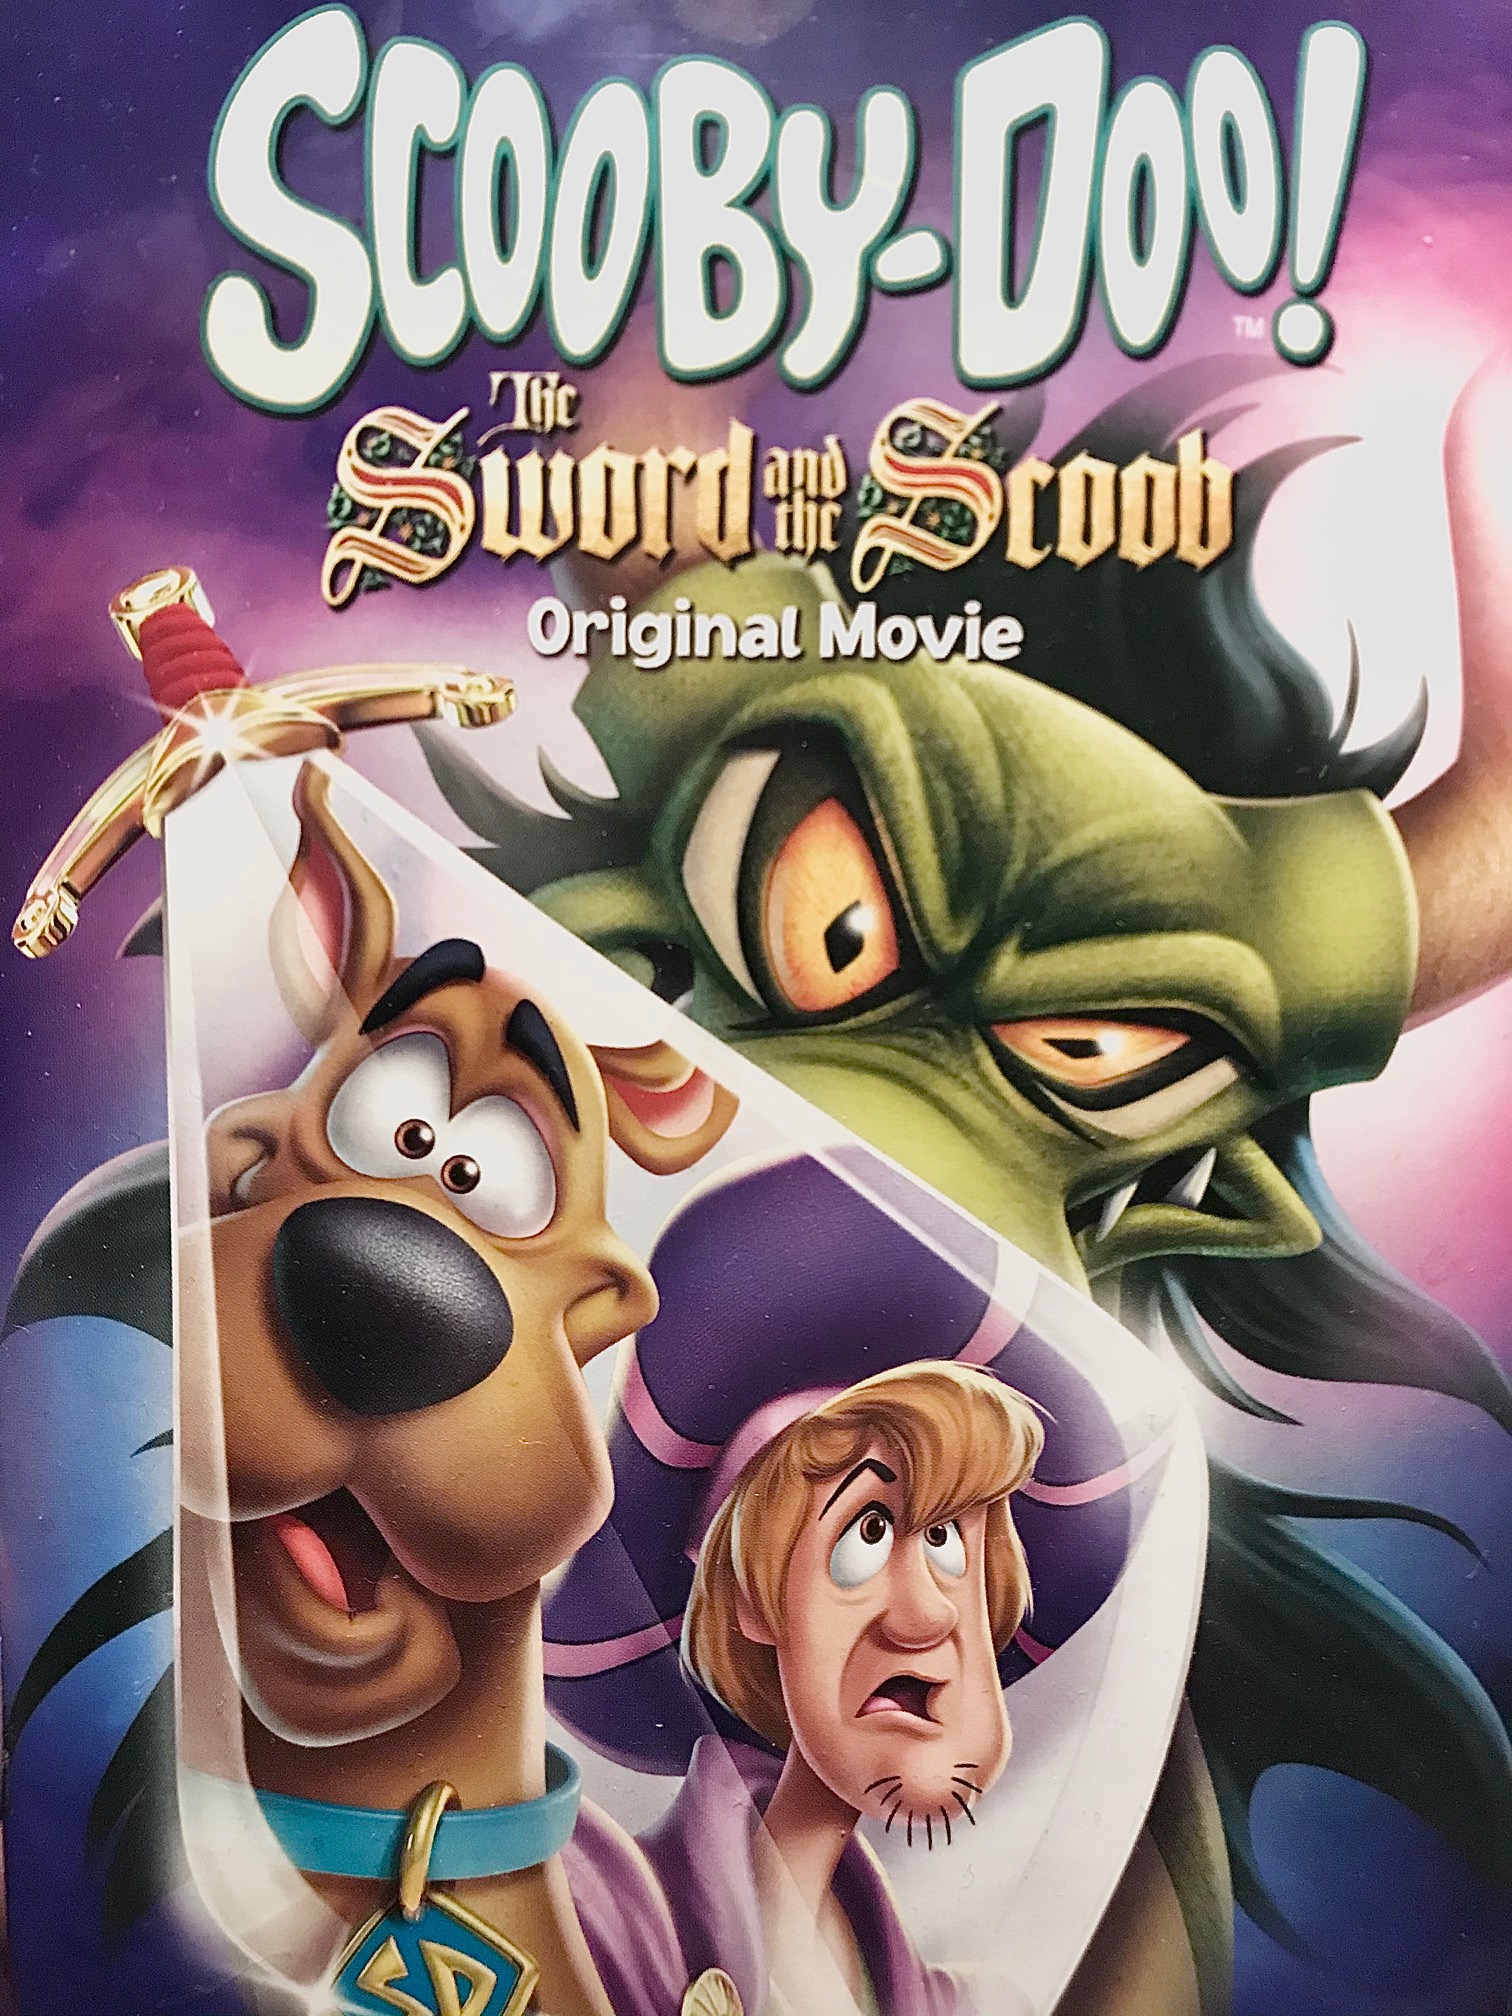 Scooby Doo - The Sword and the Scoob